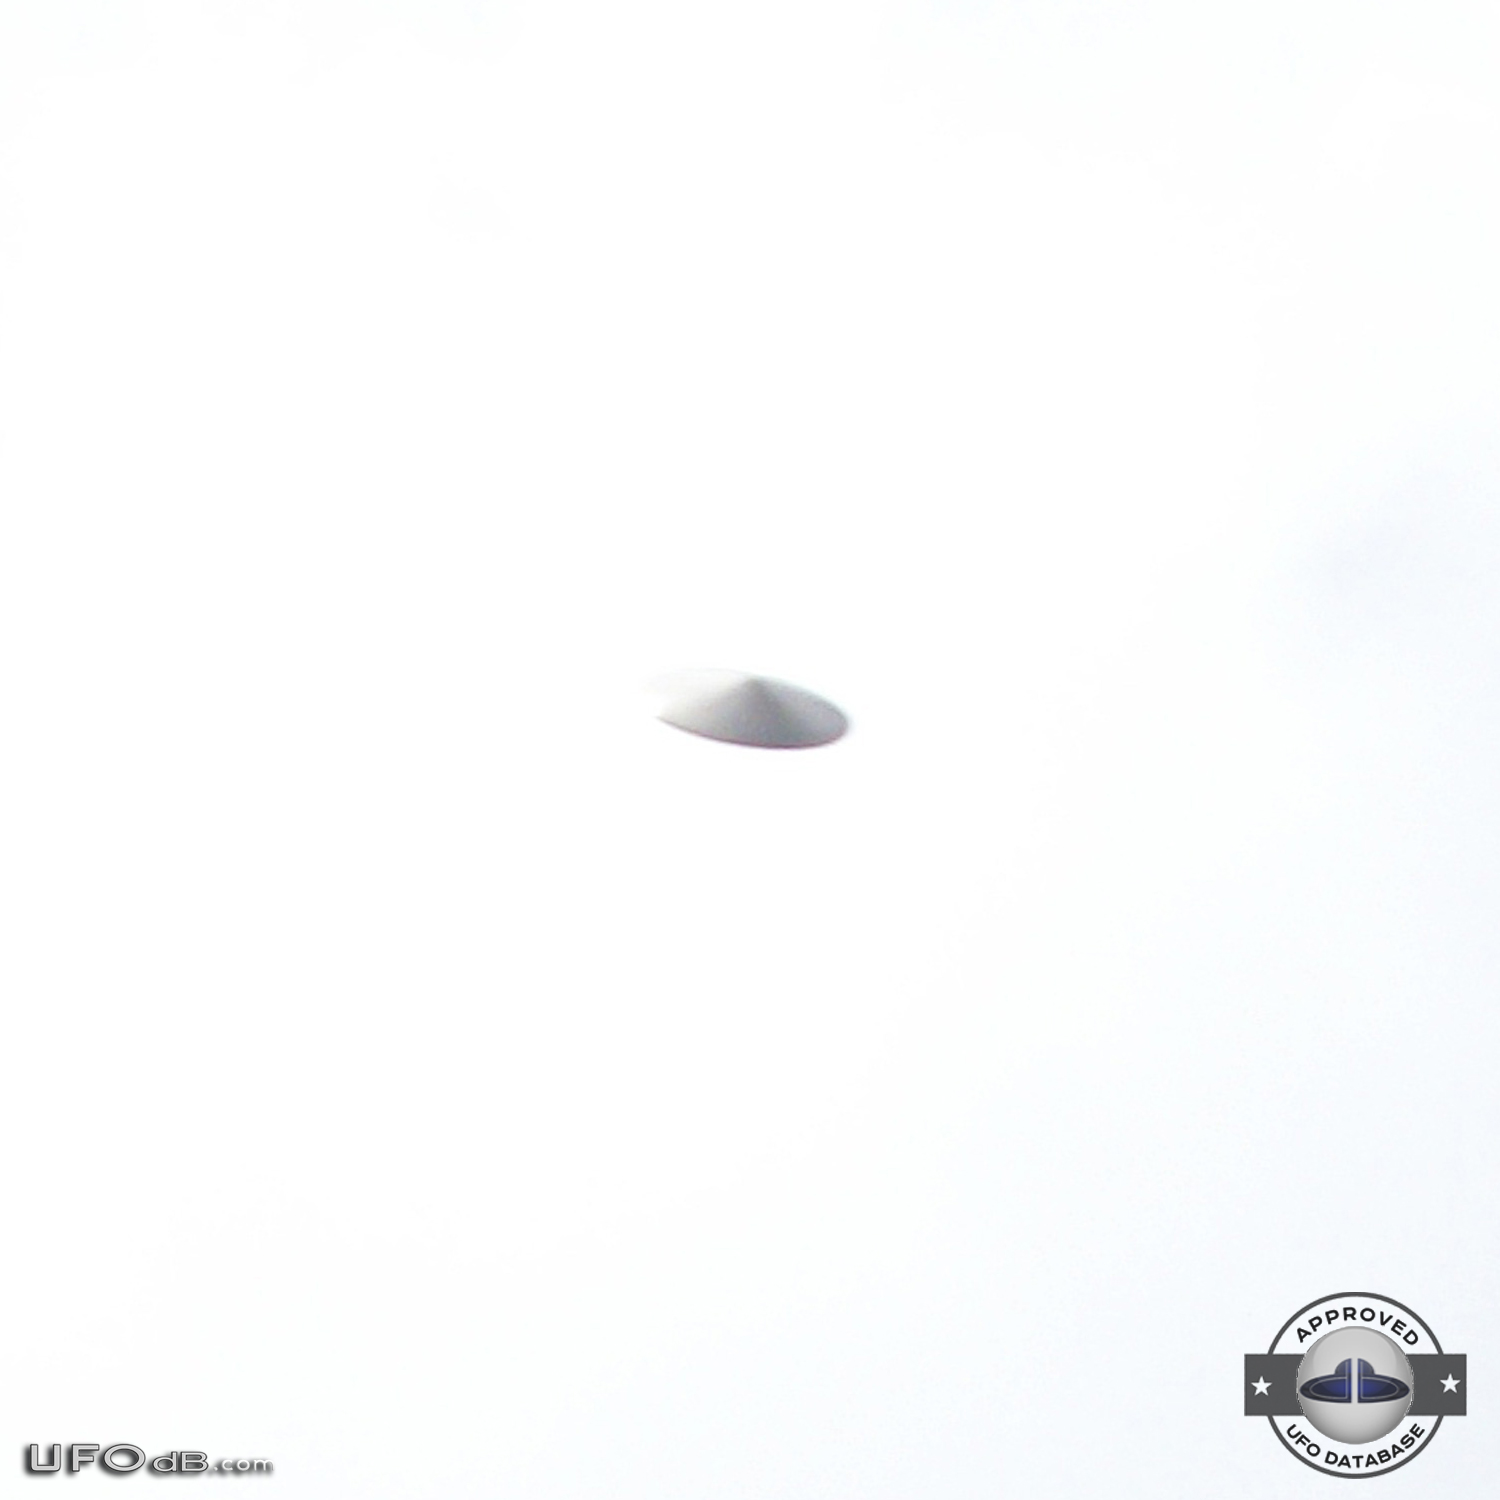 Silver saucer UFO caught on picture in Bristol, England UK - 2010 UFO Picture #412-1